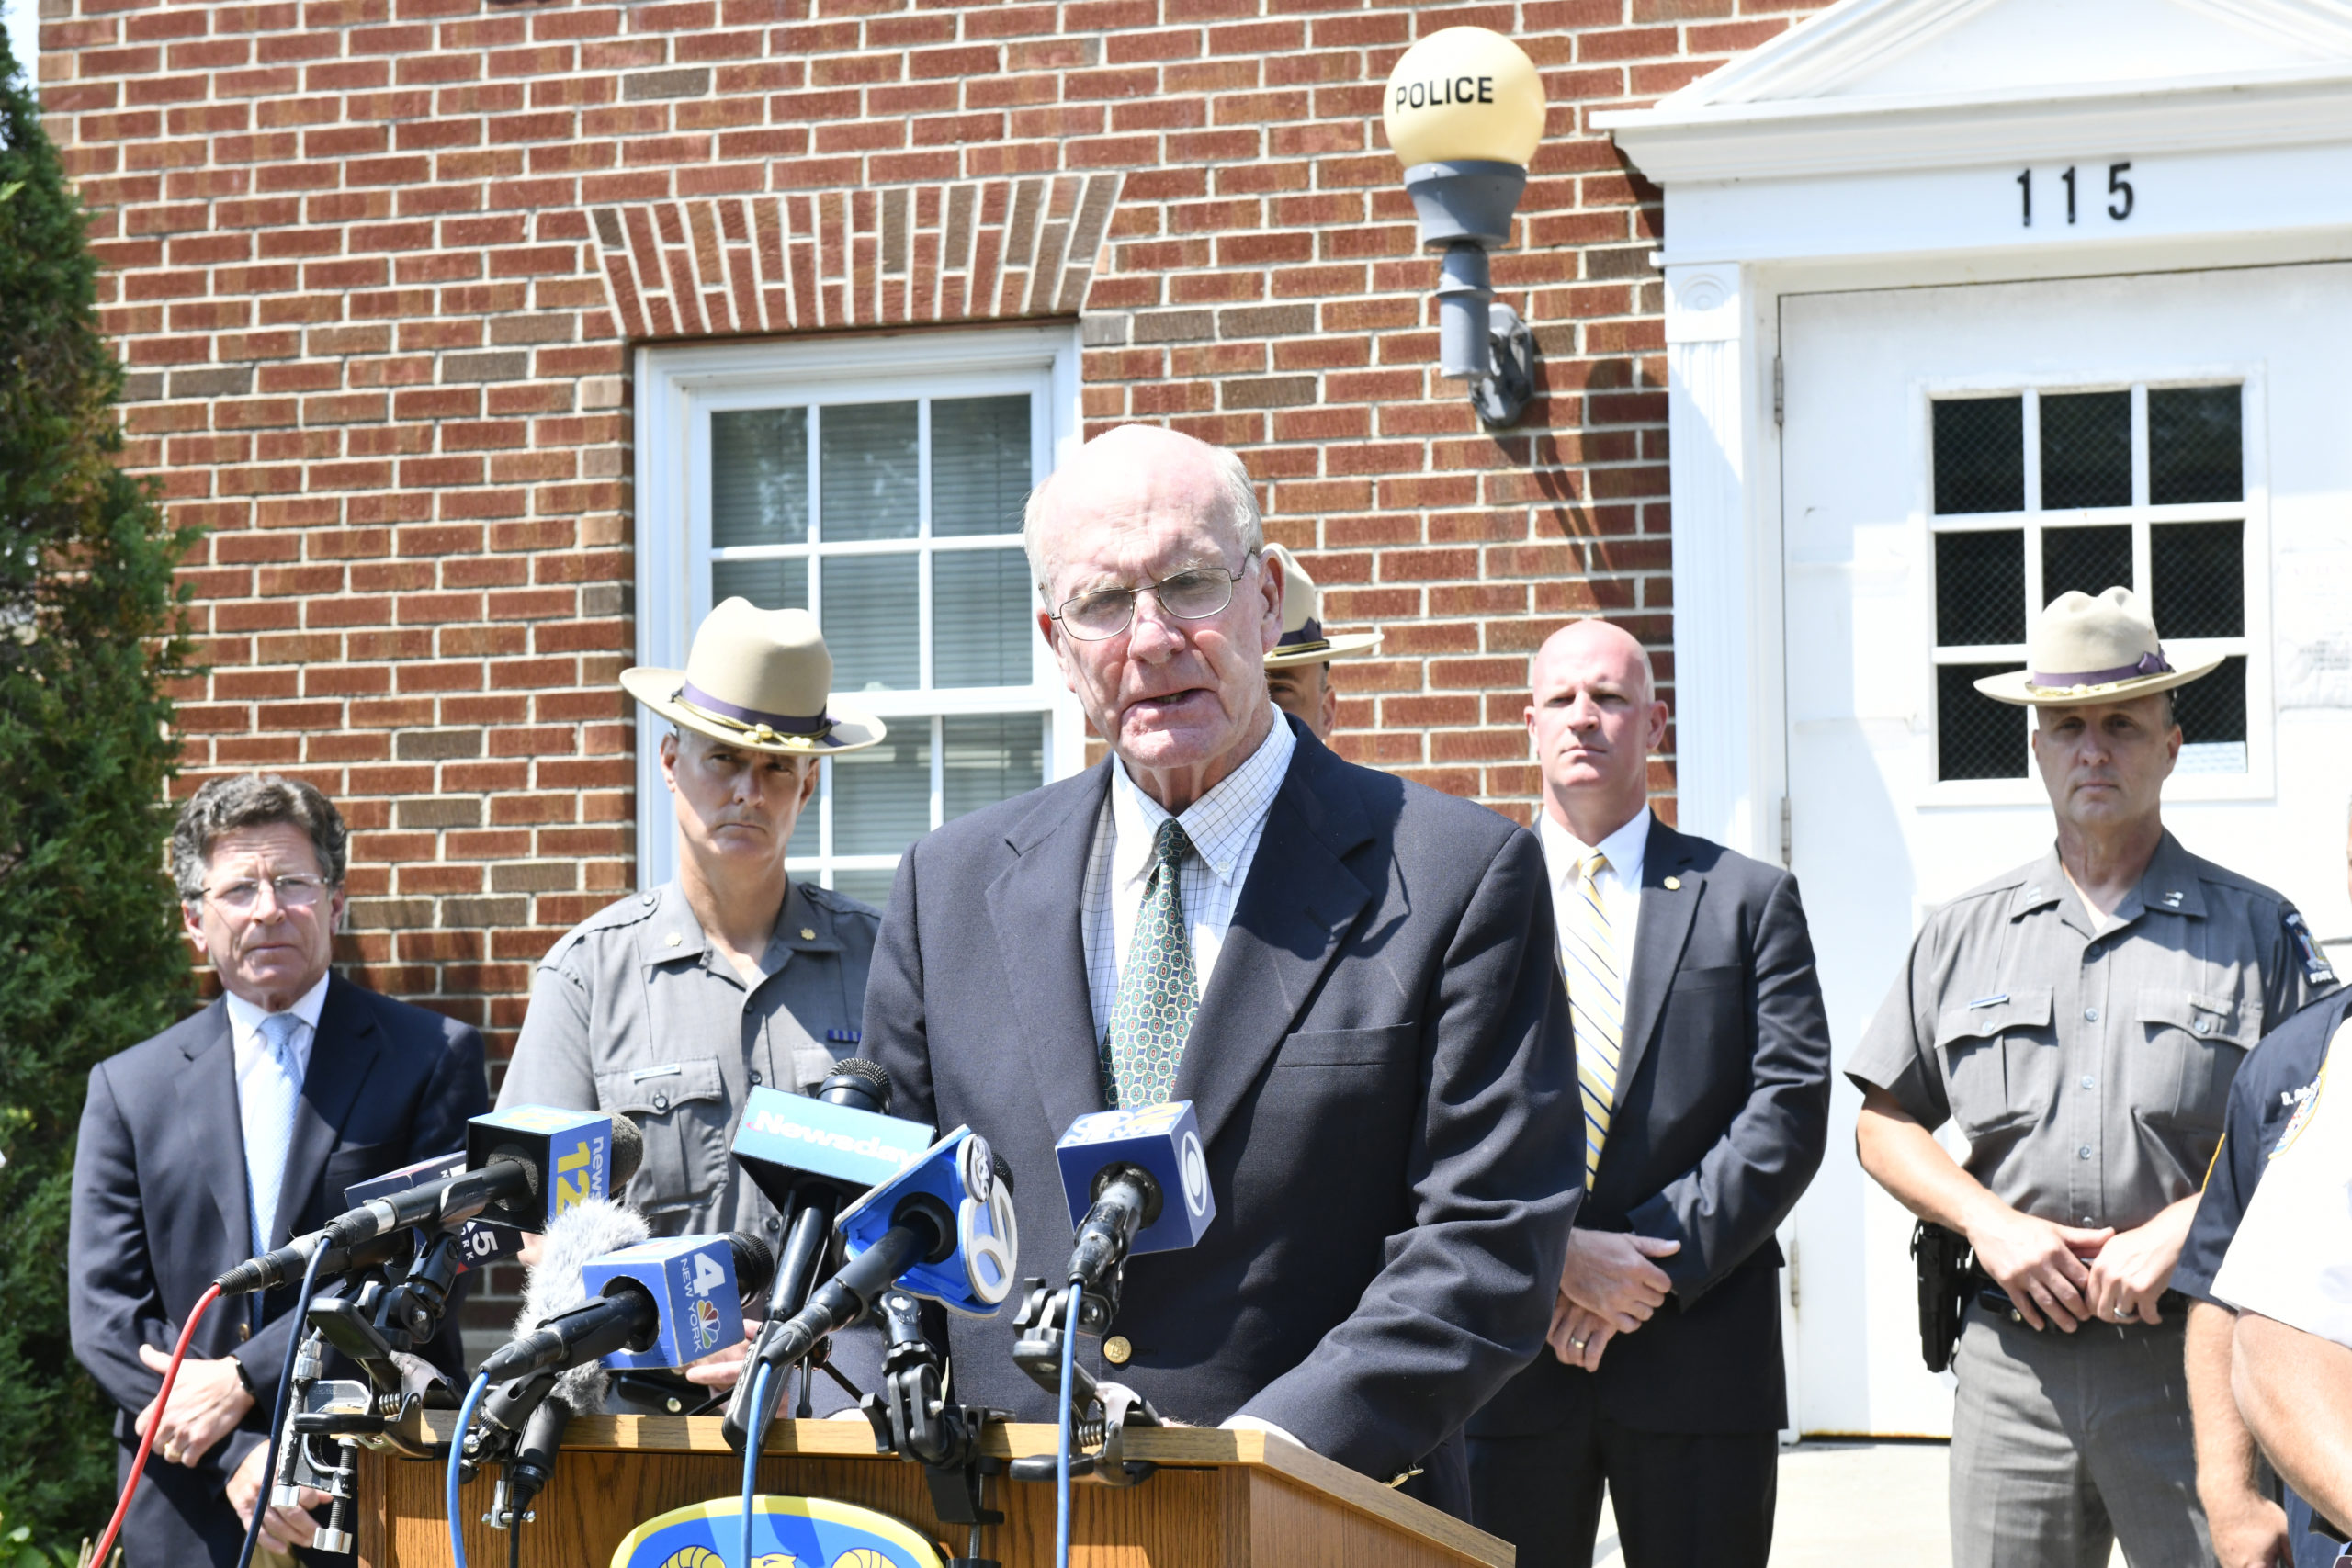 Quogue Mayor Peter Sartorius addresses the crowd at a press conference at the village police station on Tuesday morning.  DANA SHAW